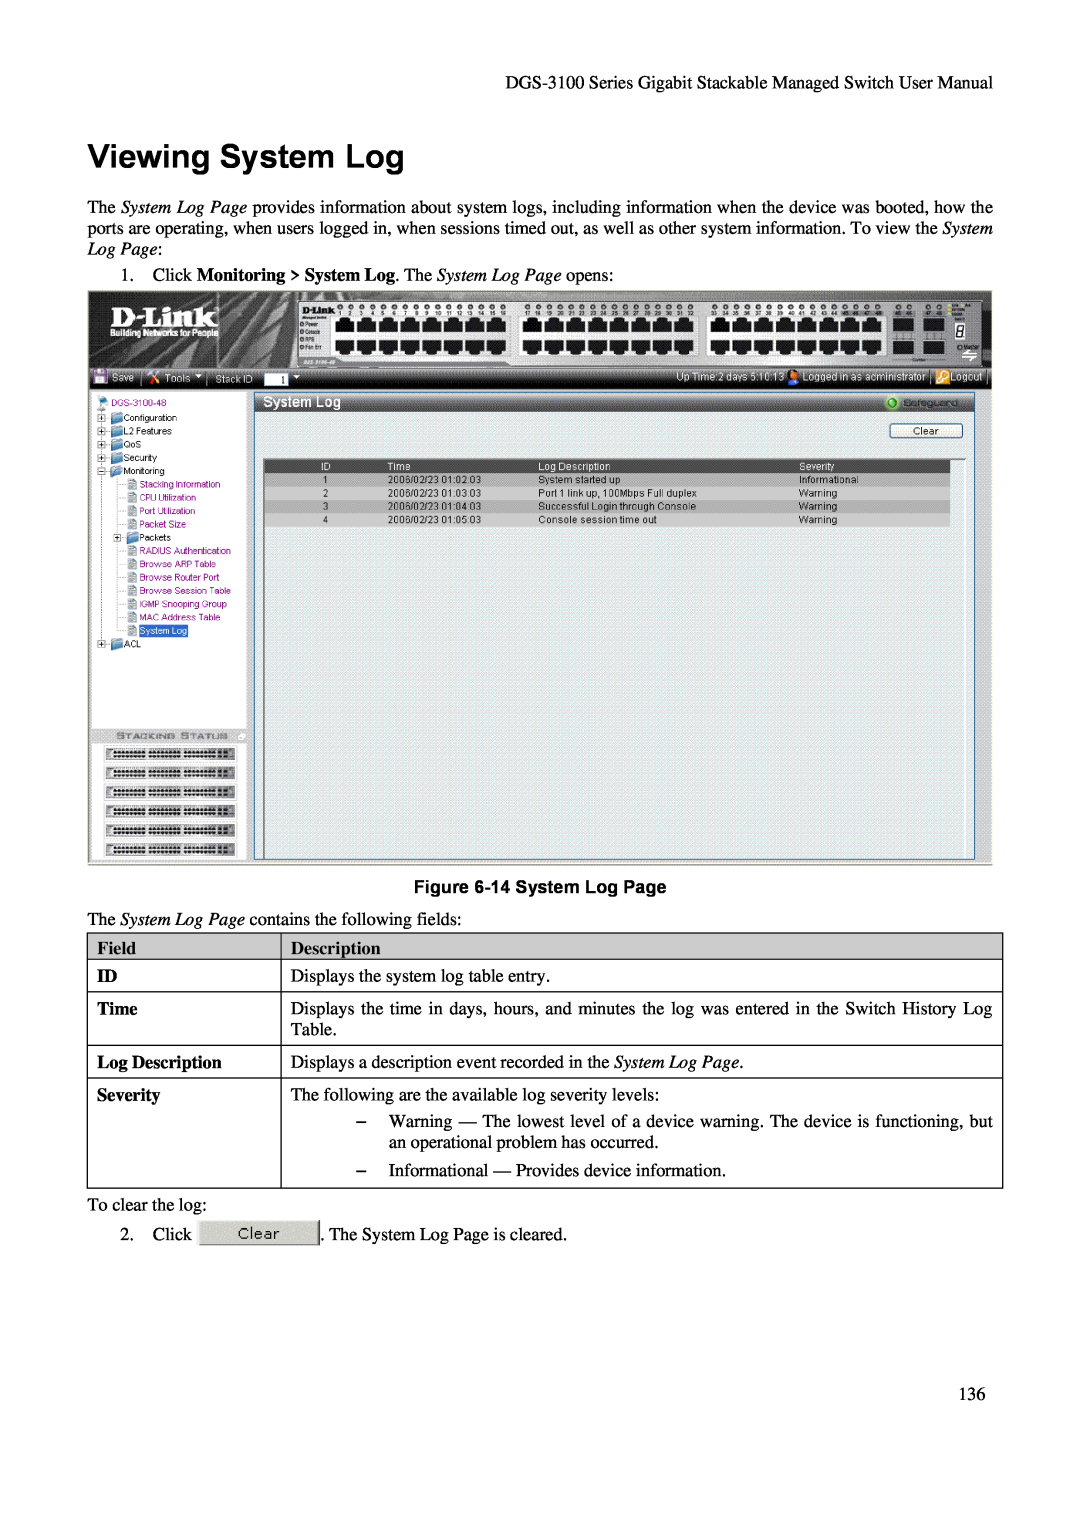 D-Link DGS-3100 user manual Viewing System Log, Click Monitoring System Log. The System Log Page opens, 14 System Log Page 